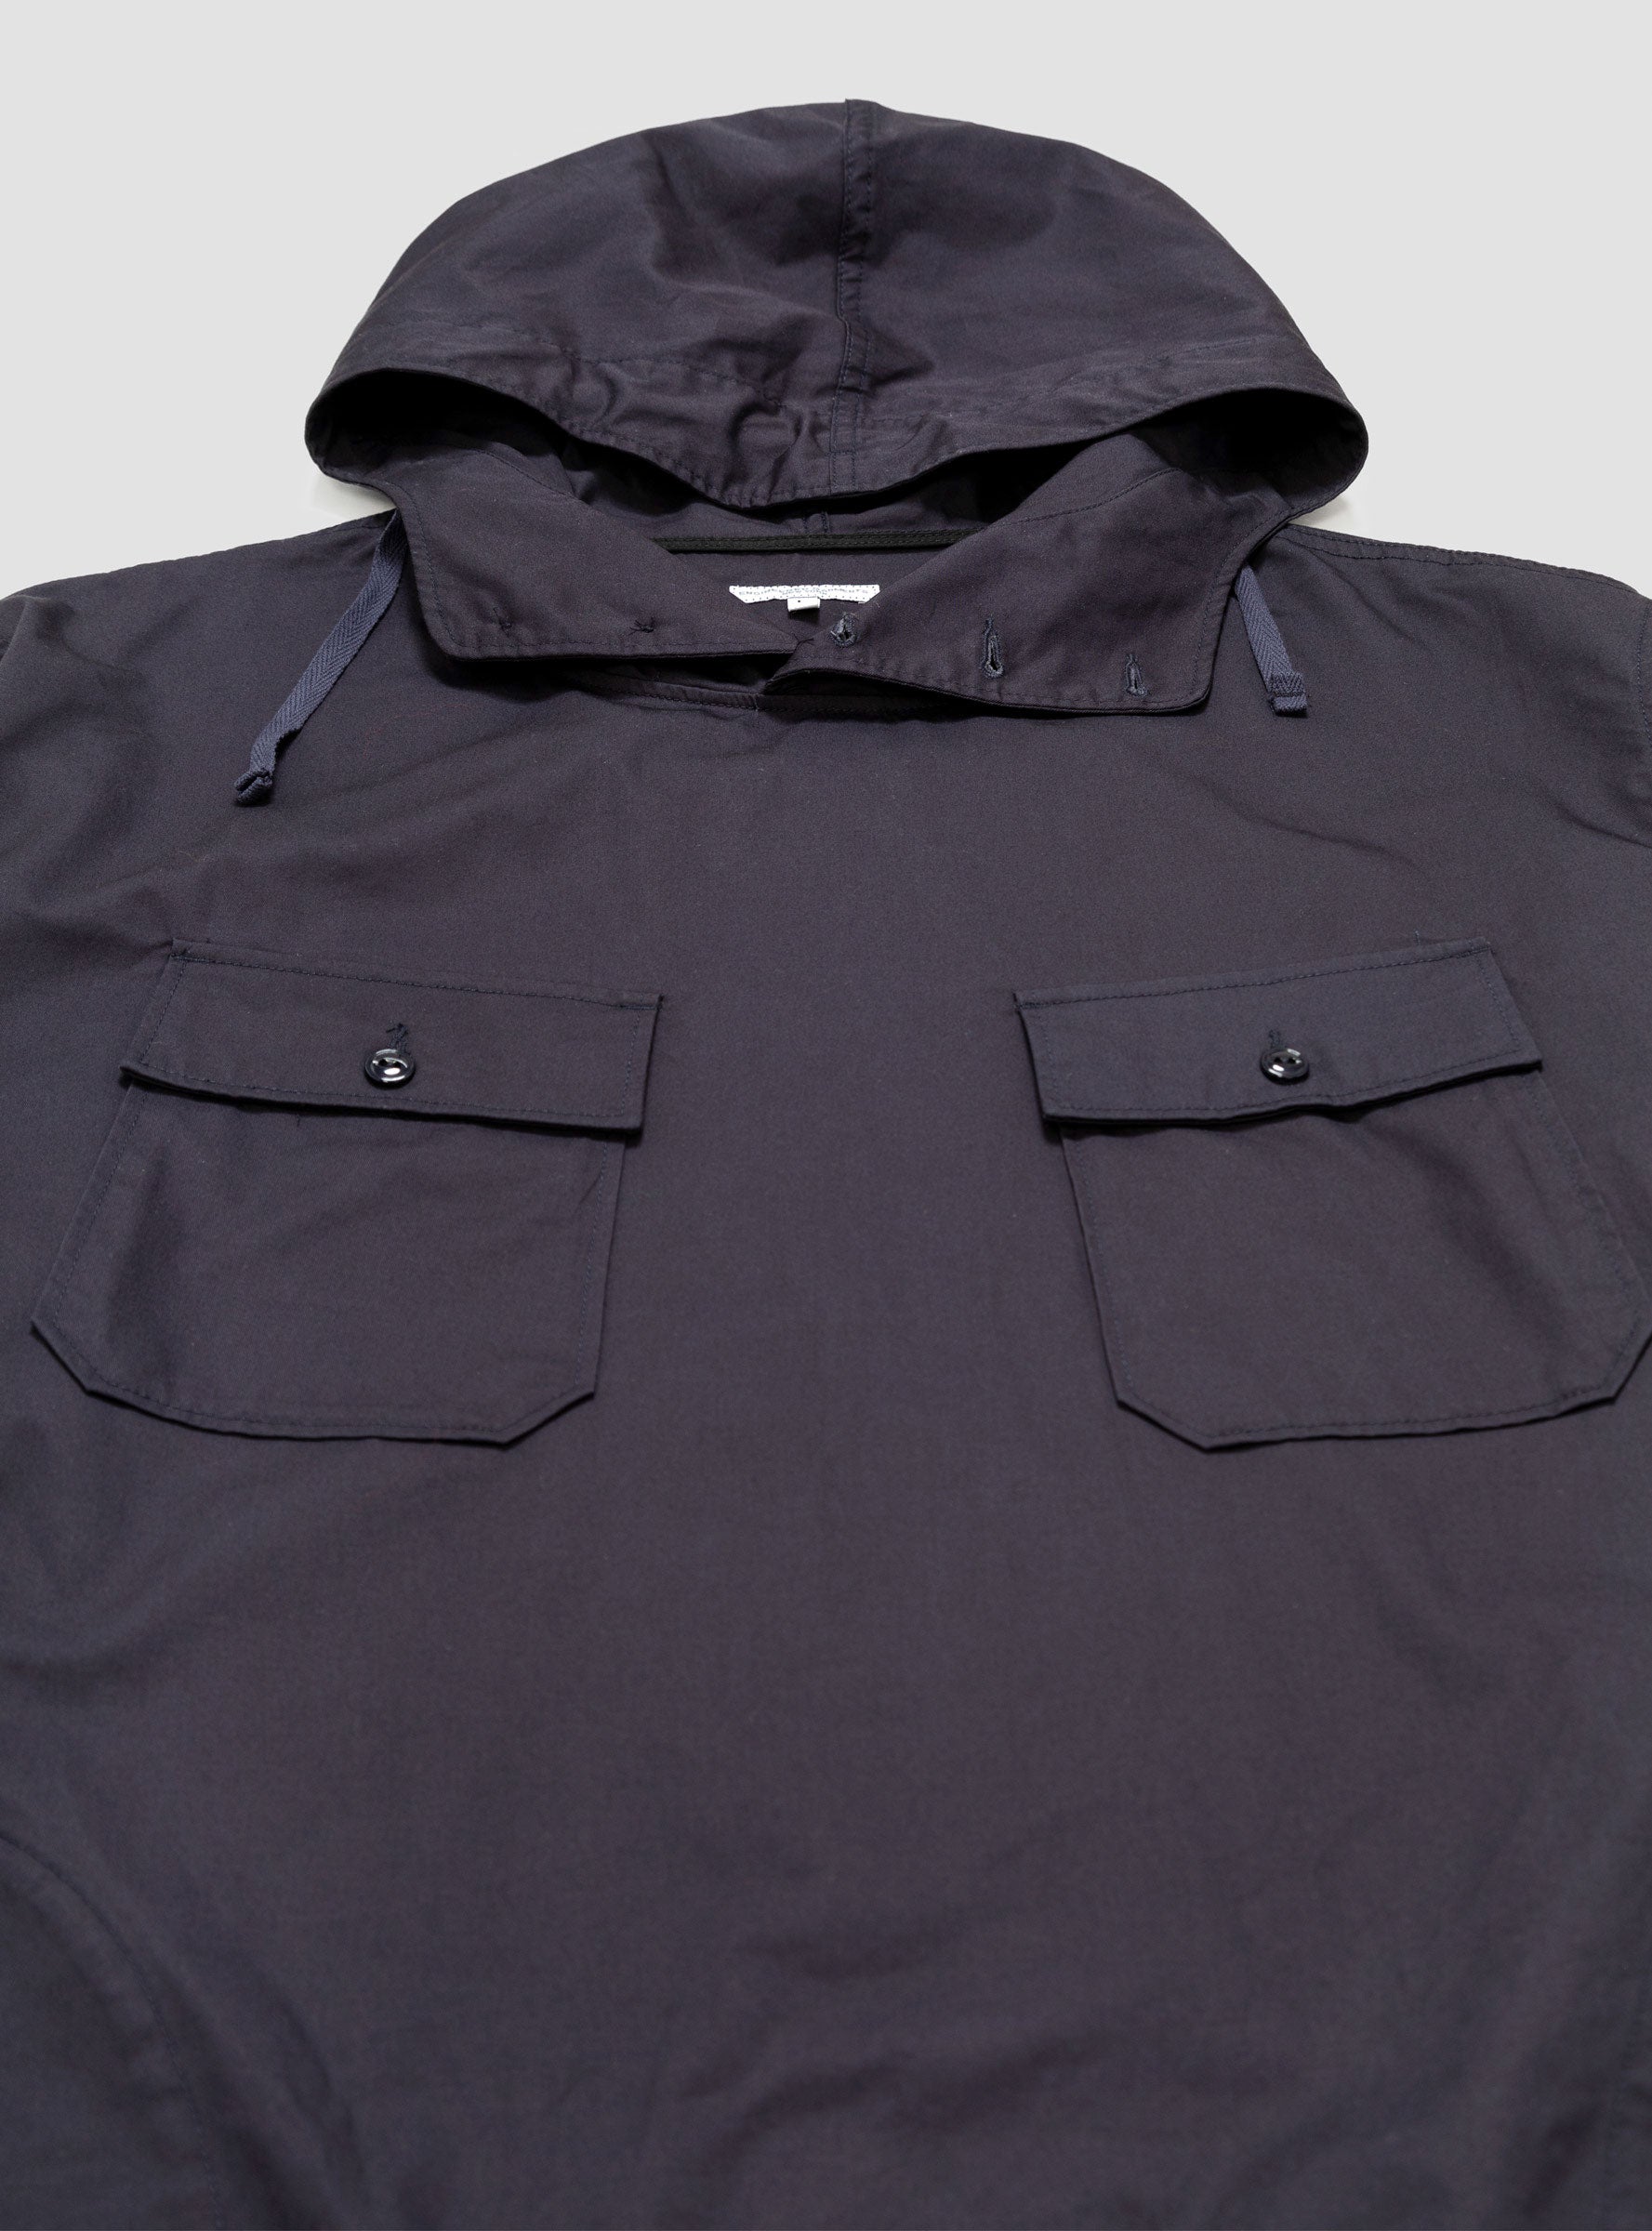 Cagoule Shirt High Count Twill Navy by Engineered Garments